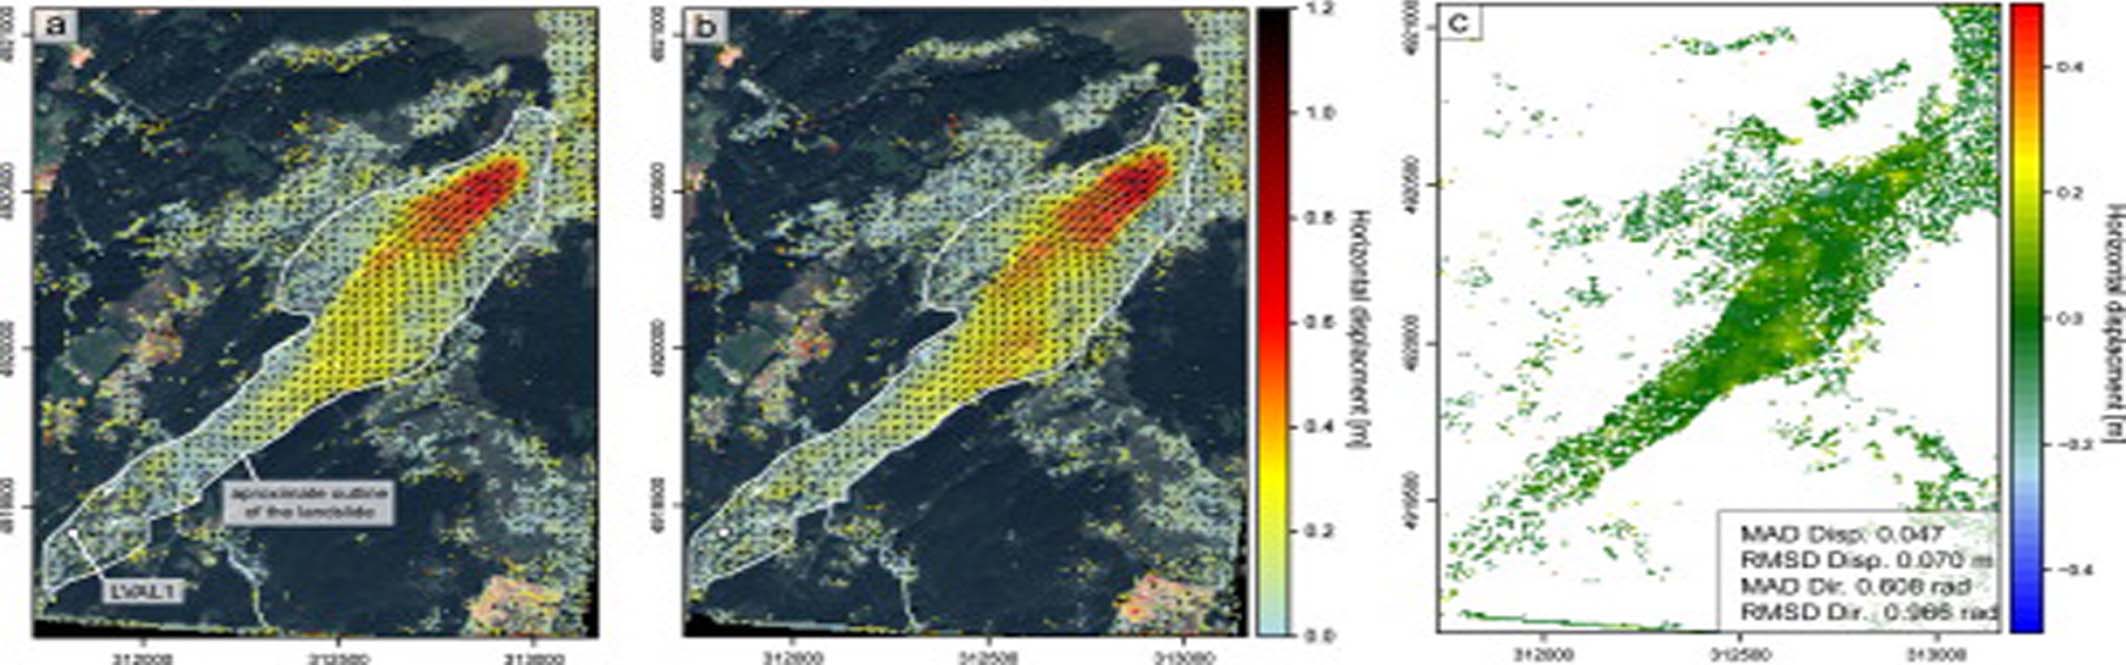 Super-Sauze landslide: quantification of surface displacements by correlation of optical satellite imagery 